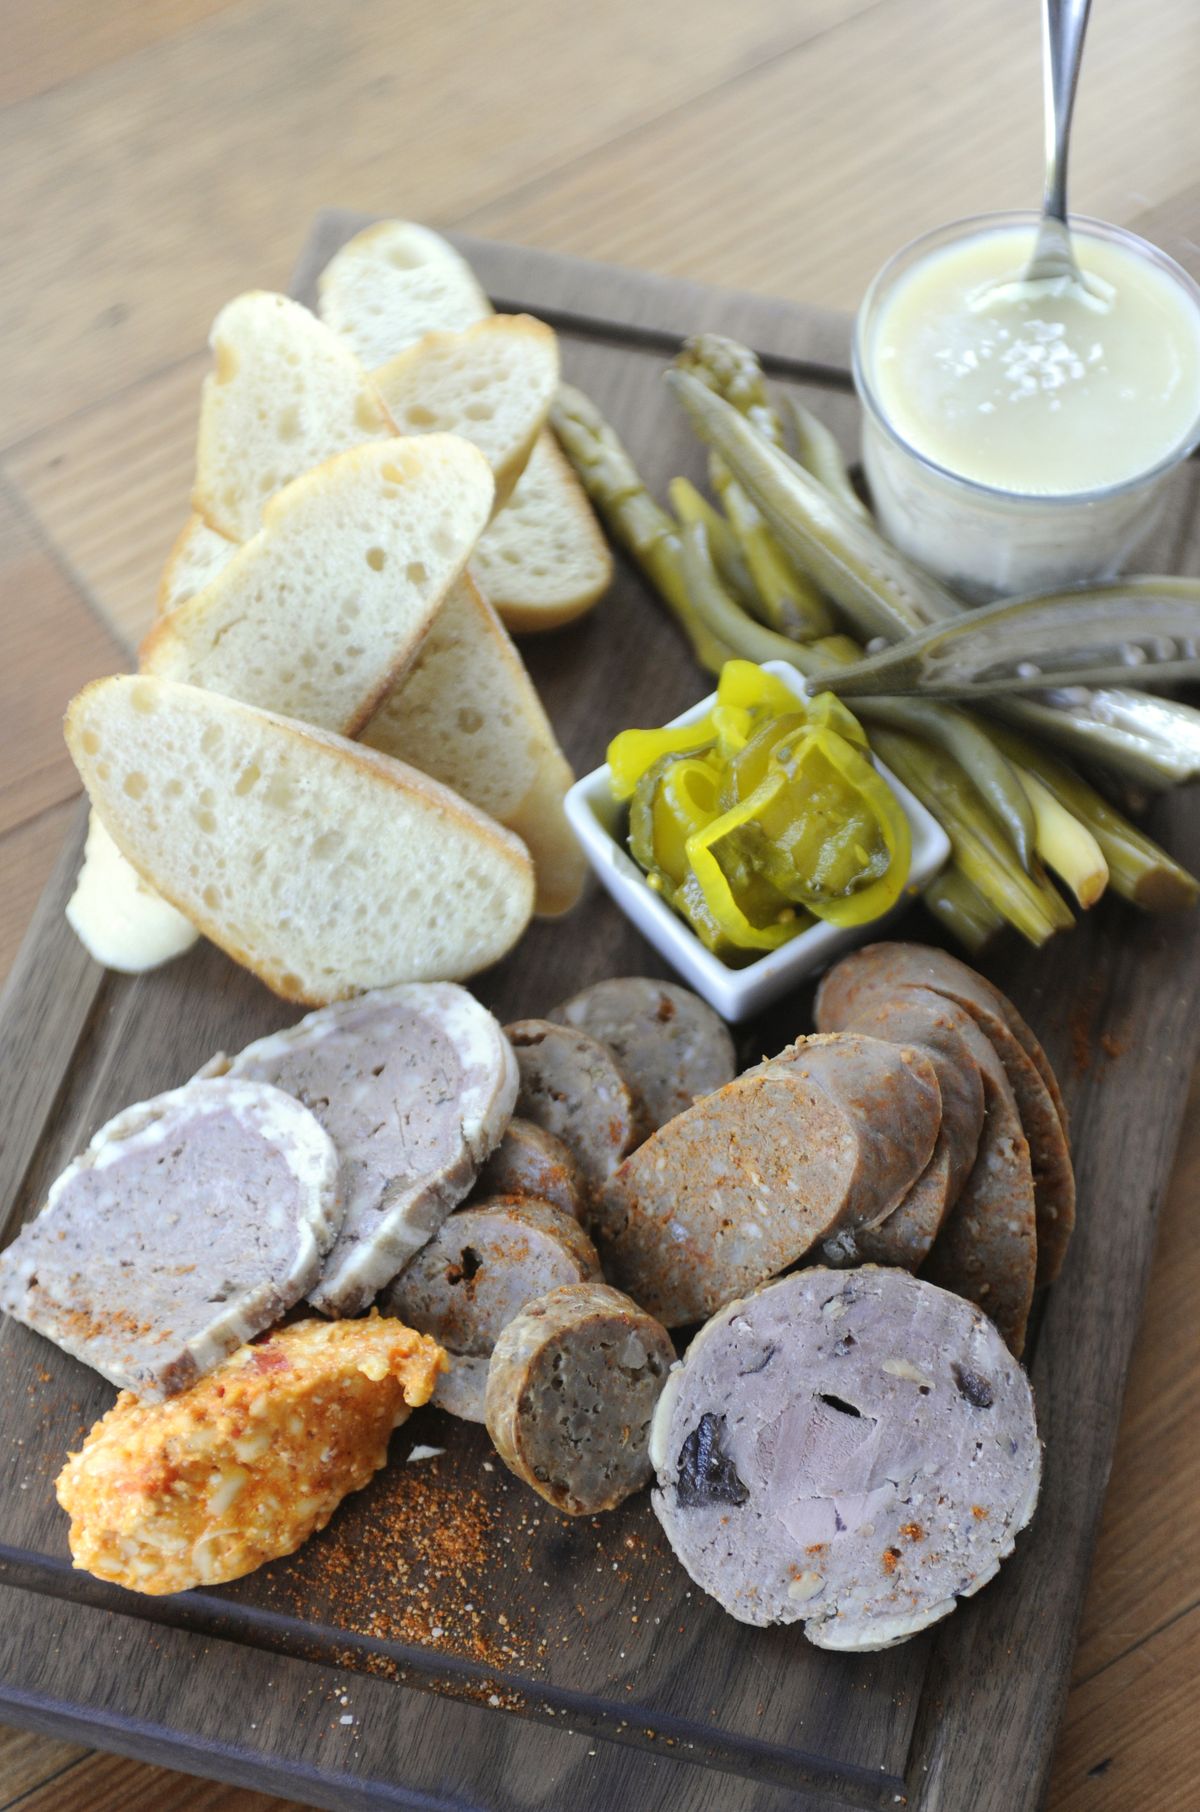 The Pantry Plate, a platter of sausages and pickled vegetables and condiments inspired by European cuisine, is among the offerings at Casper Fry. See more in Wednesday’s Food section. (Jesse Tinsley)